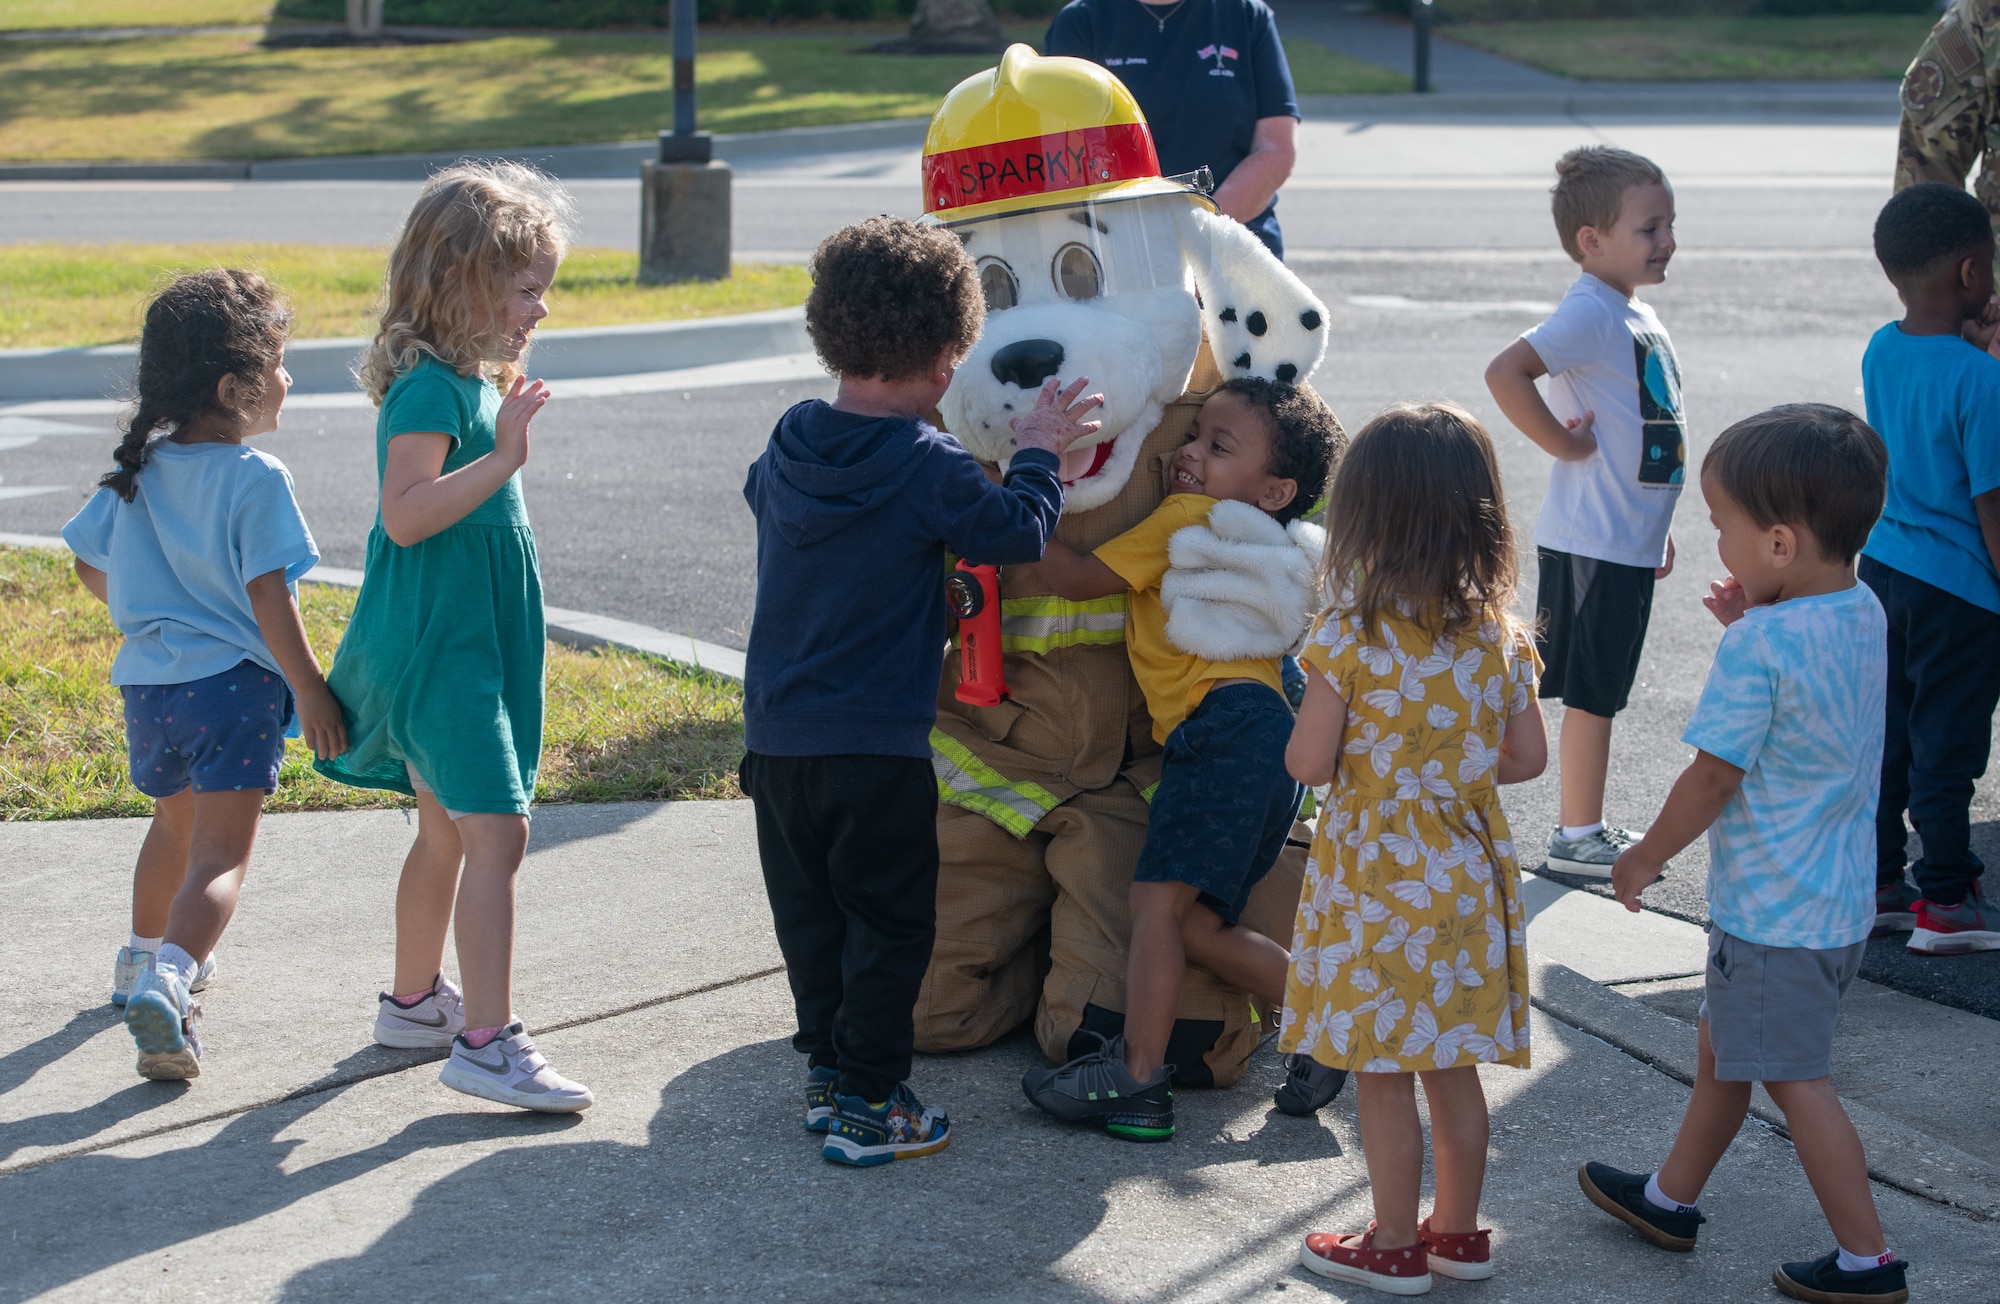 A child from the Child Development Center receives a hug from Sparky the fire dog, the official mascot of the National Fire Protection Association during the Fire Prevention Week tour at the CDC on Keesler Air Force Base, Mississippi, Oct. 13, 2022. Throughout the week the Keesler Fire Department conducted random fire drills, toured various facilities with Sparky the fire dog, passed out fire safety information and fire hats for children. (U.S. Air Force Photo by Andre' Askew)